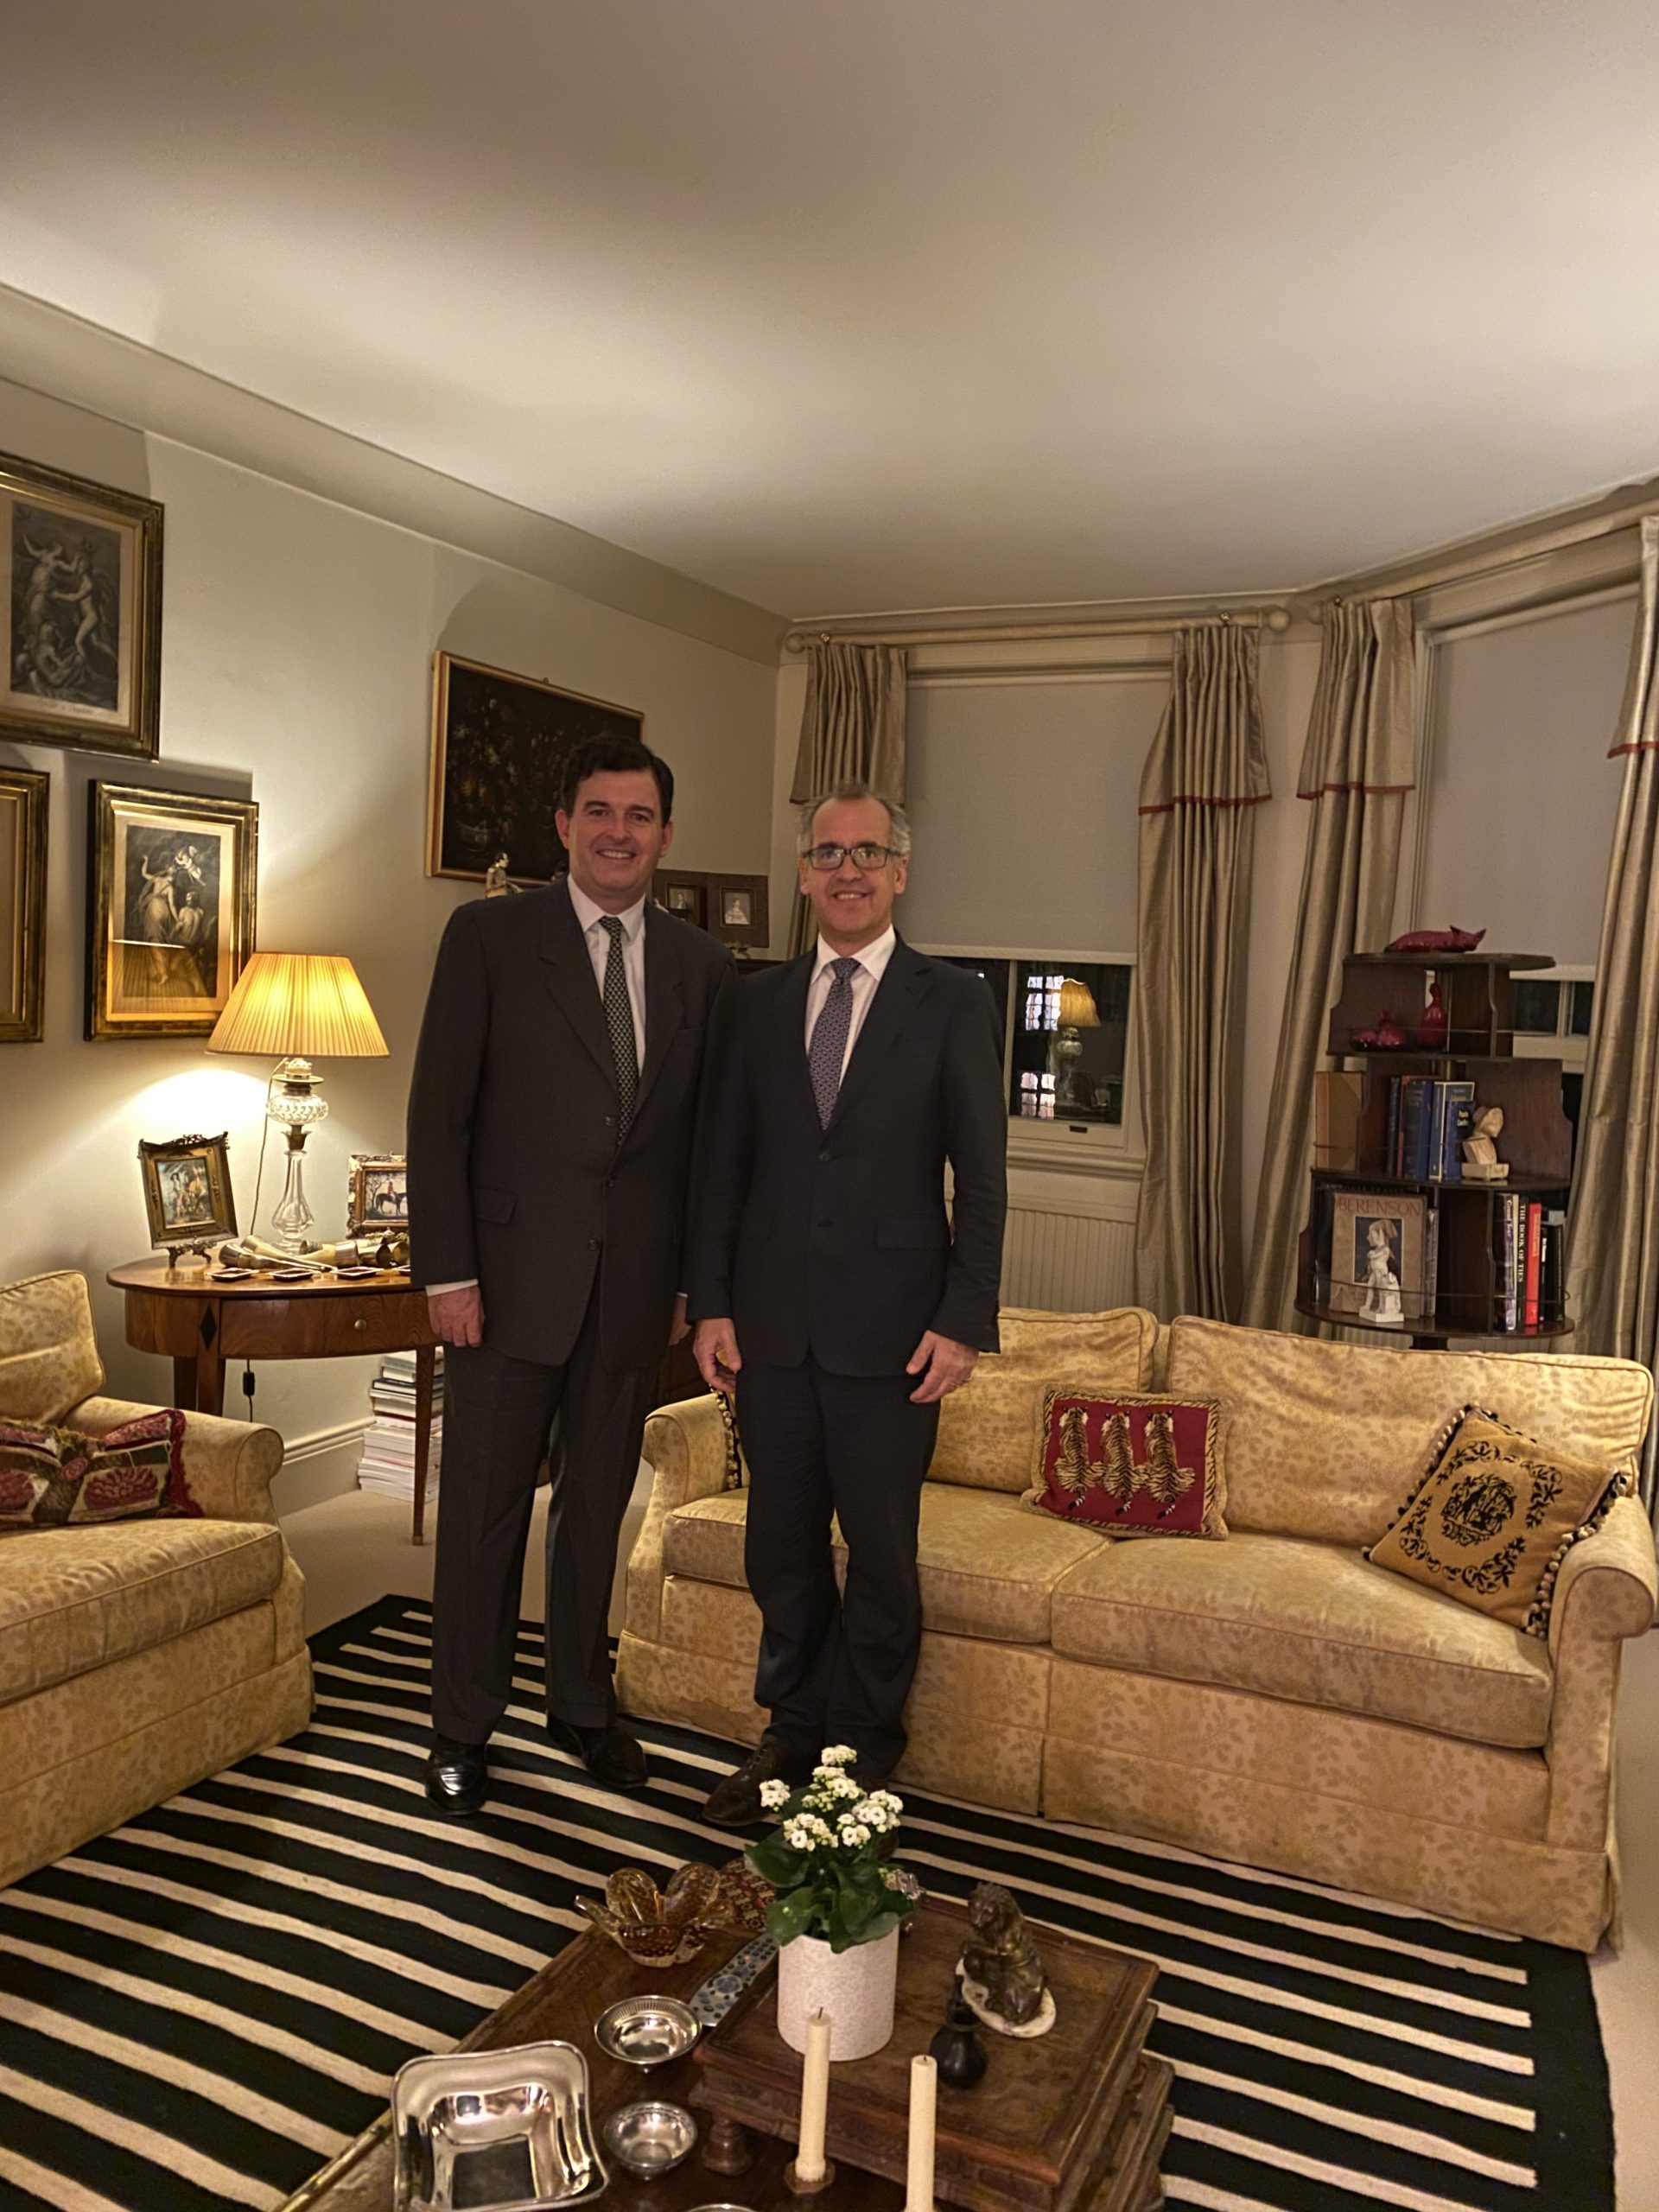 British and Irish Delegate Anthony Bailey meets with Rome-based Constantinian Order Grand Chancellor Prince Ruspoli